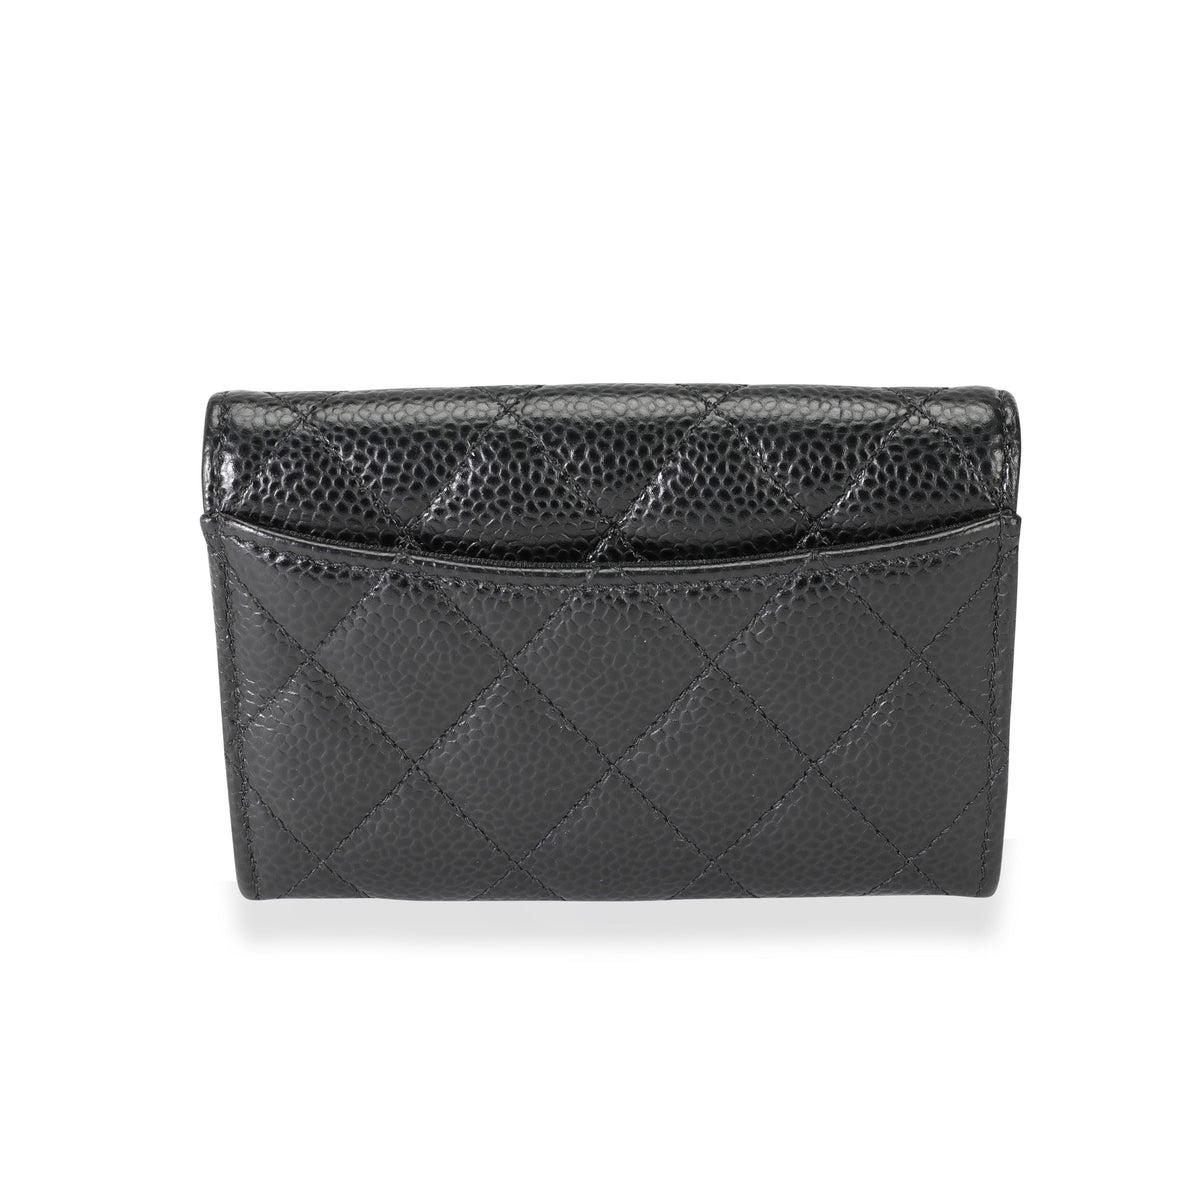 Chanel Yellow Quilted Lambskin Card Holder Wallet, myGemma